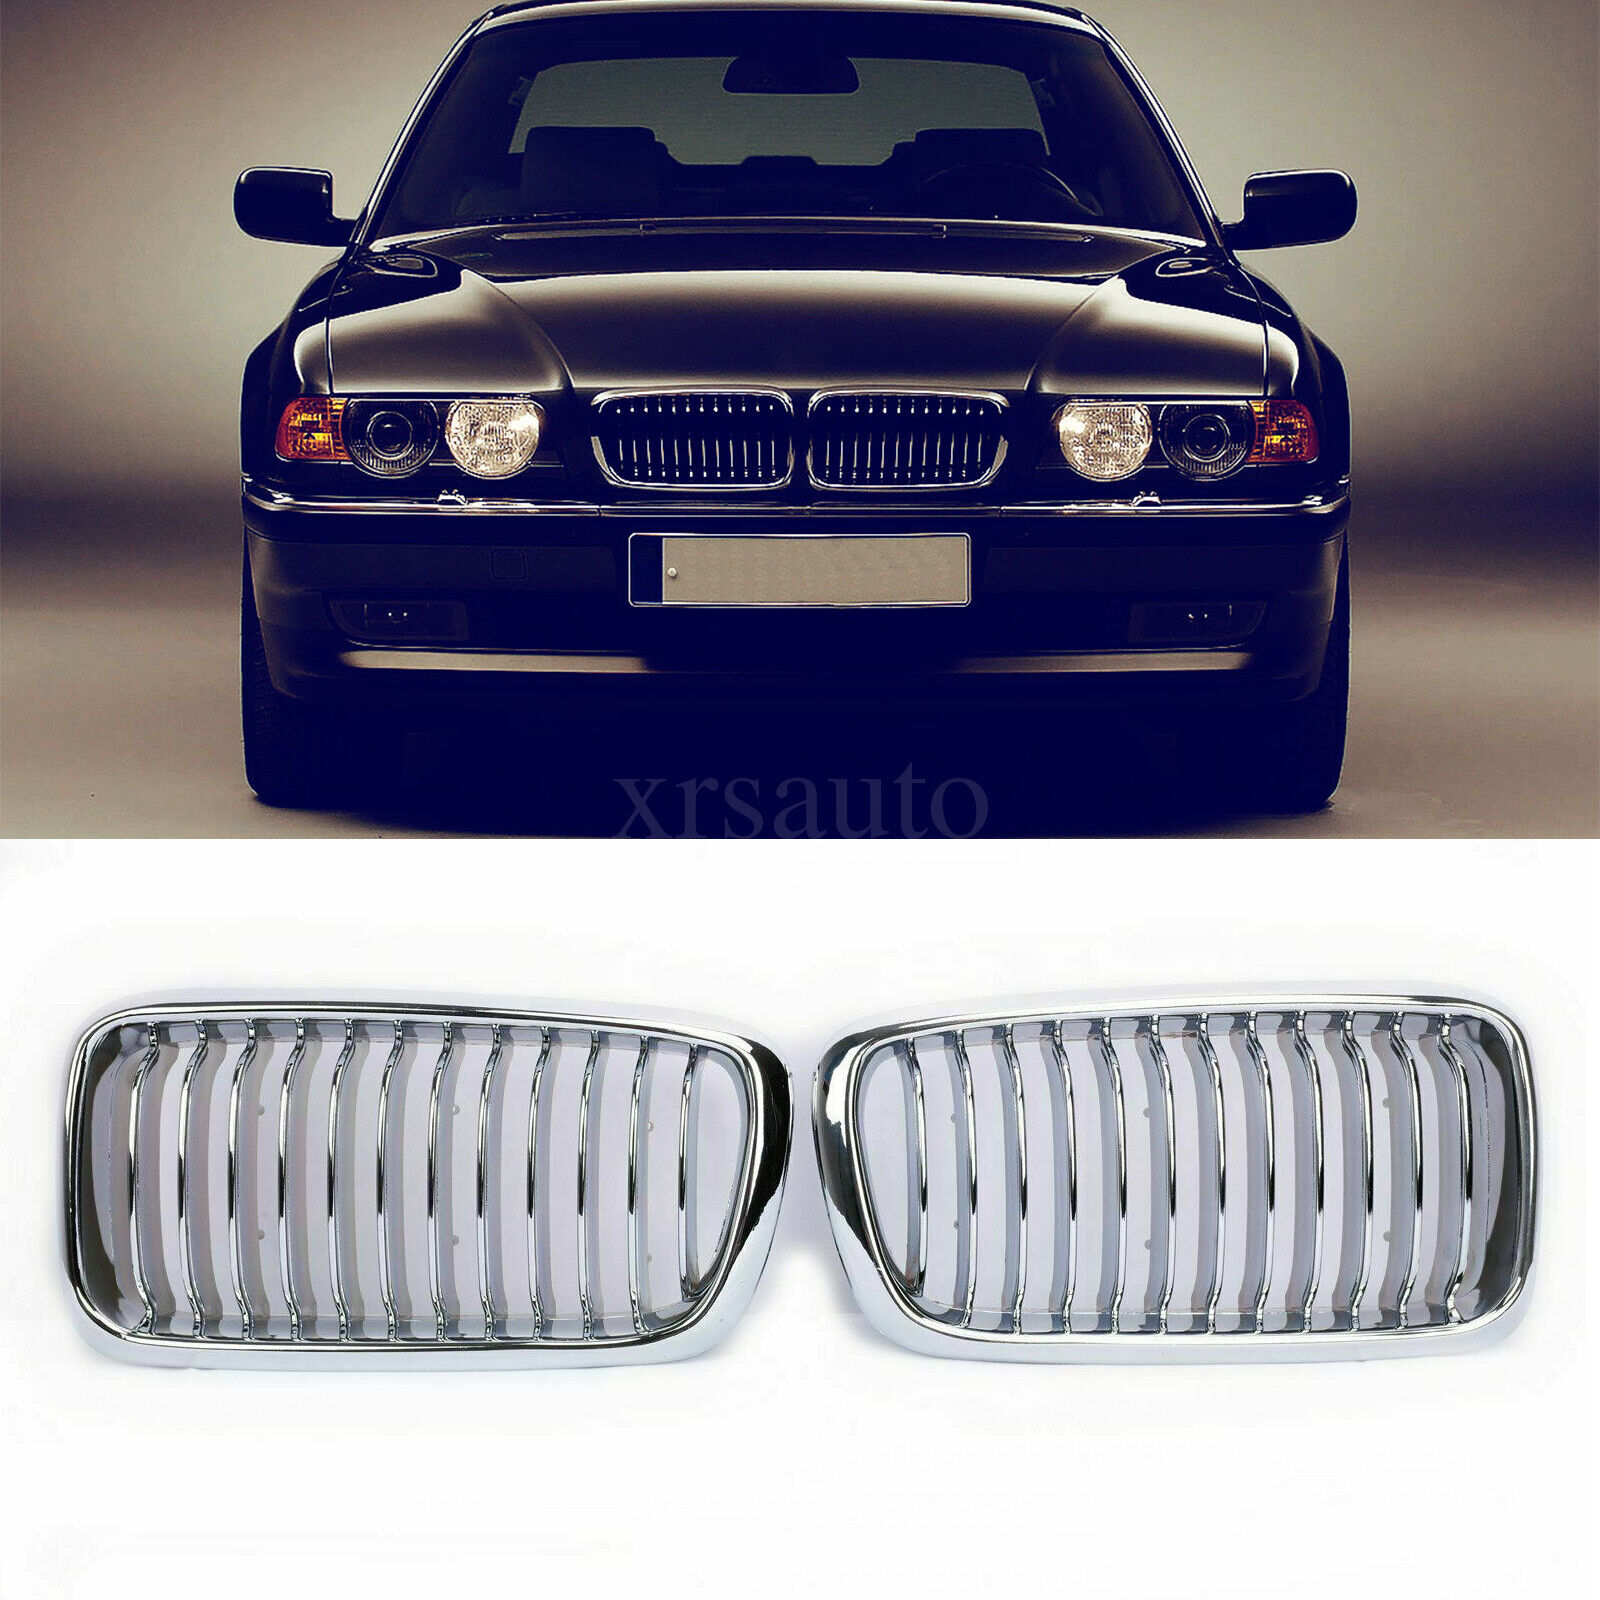 GRILLE For BMW E38 740 750 IL 99-02 FRONT HOOD GRILL CHROME